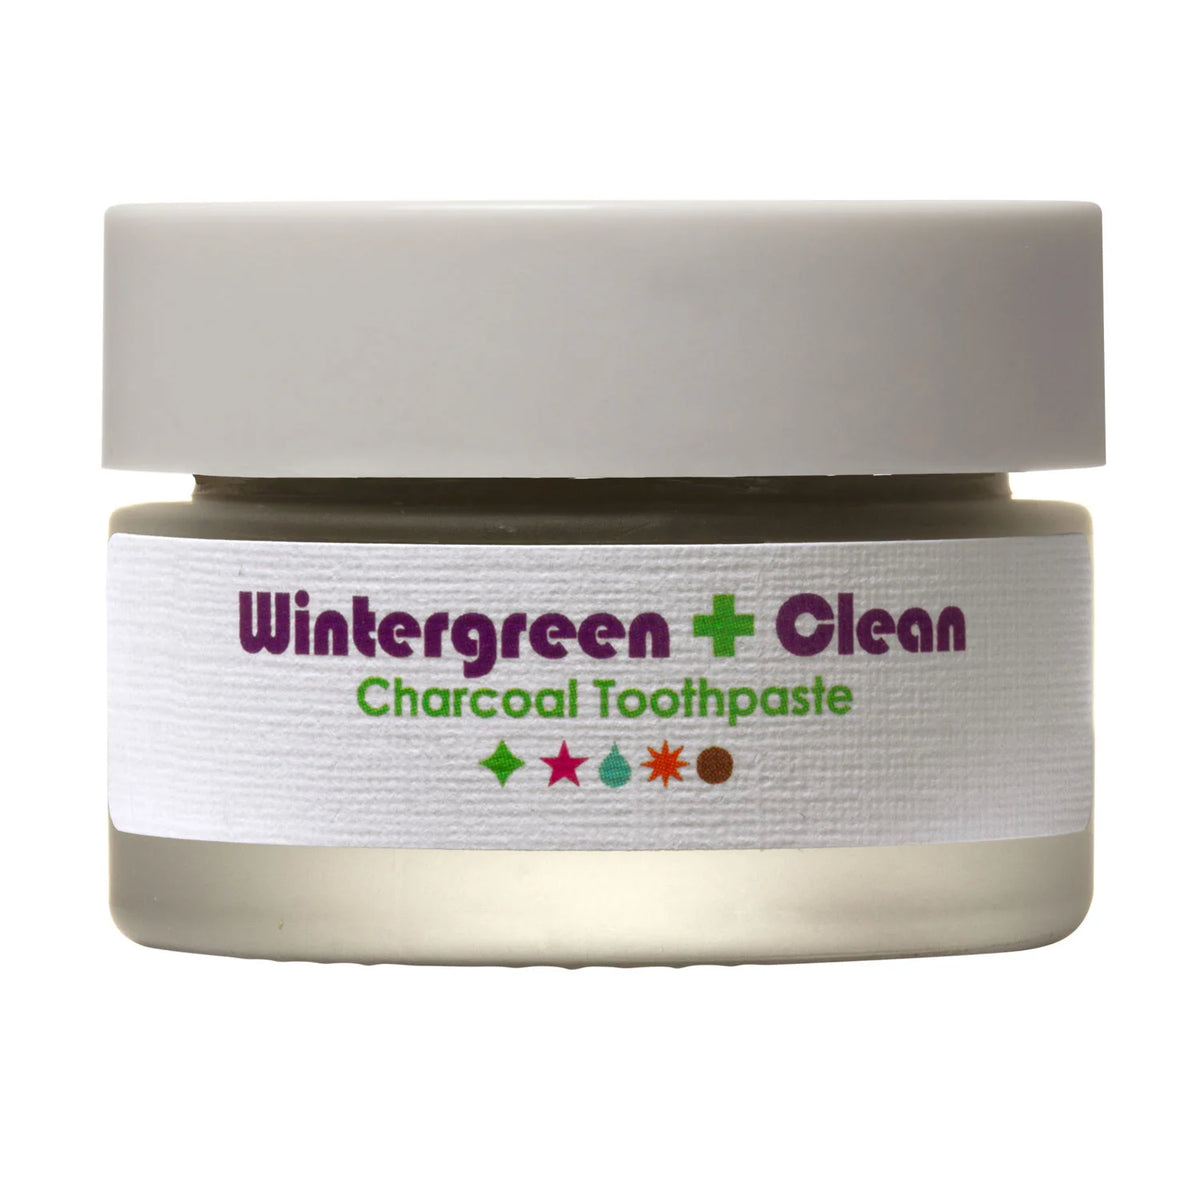 Living Libations - Wintergreen Activated Charcoal Toothpaste (15ml / 30ml)